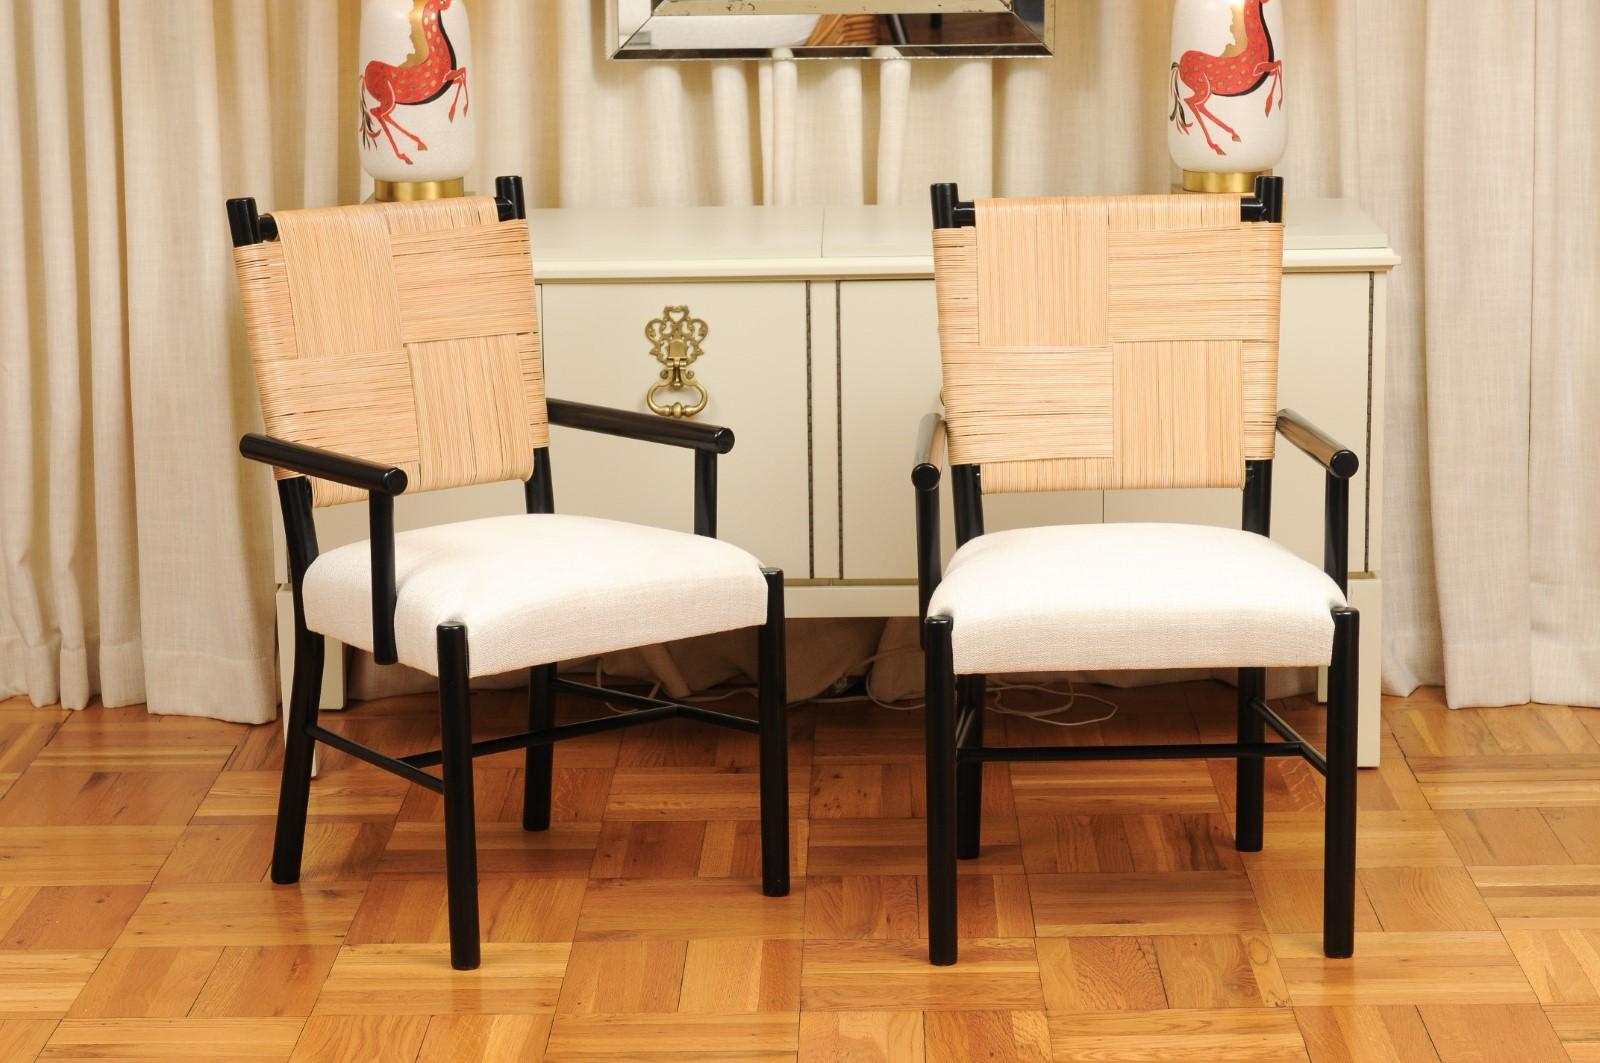 This magnificent large ALL ARMS set of dining chairs is Unique on the World market. The set is shipped as professionally photographed and described in the listing narrative: Meticulously professionally restored, newly custom upholstered and